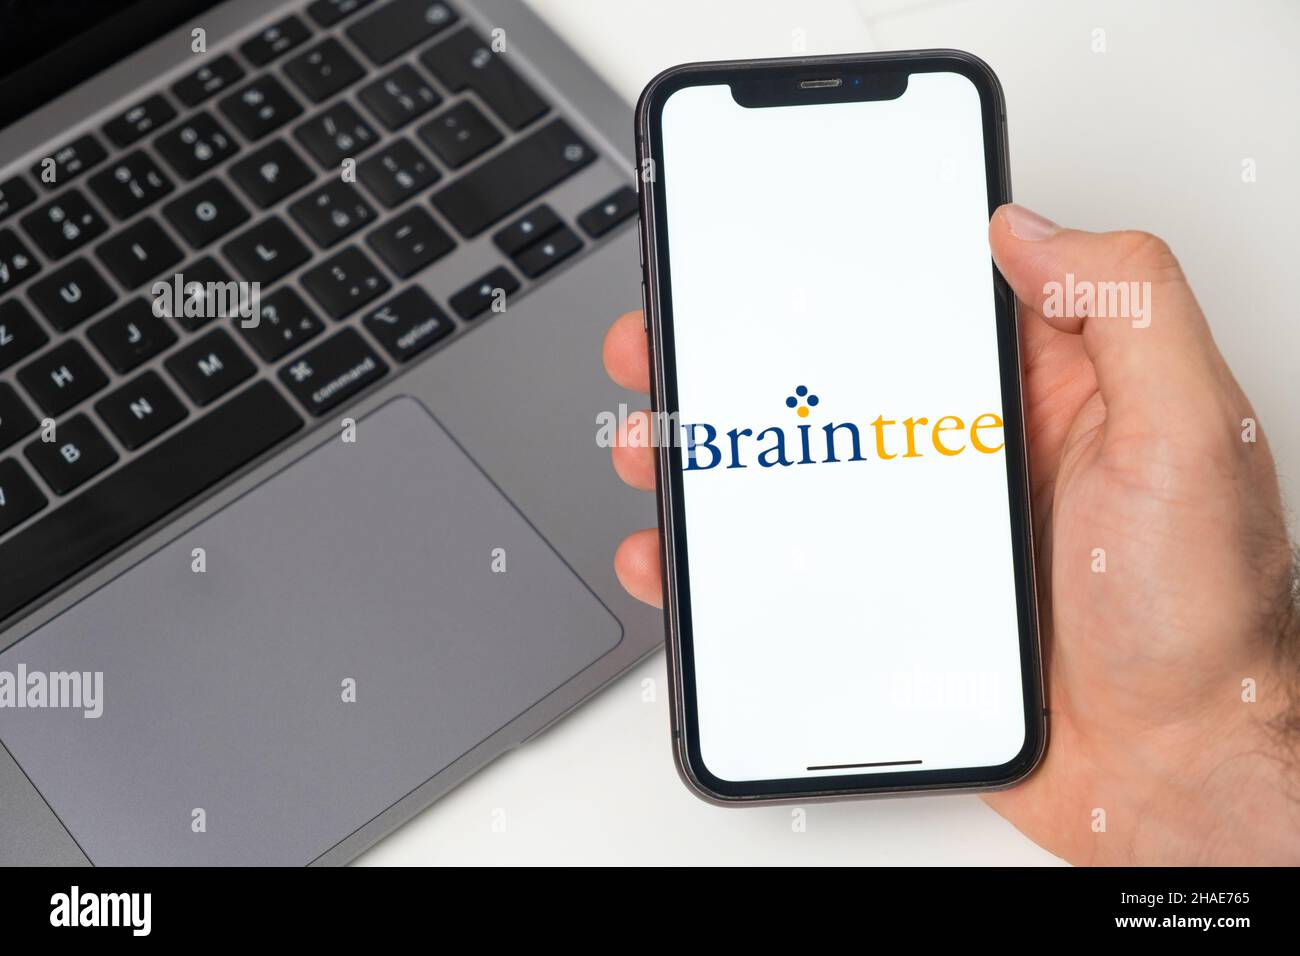 Braintree crypto wallet logo on the screen of mobile phone and notebook on the background, November 2021, San Francisco, USA. November 2021, San Francisco, USA Stock Photo